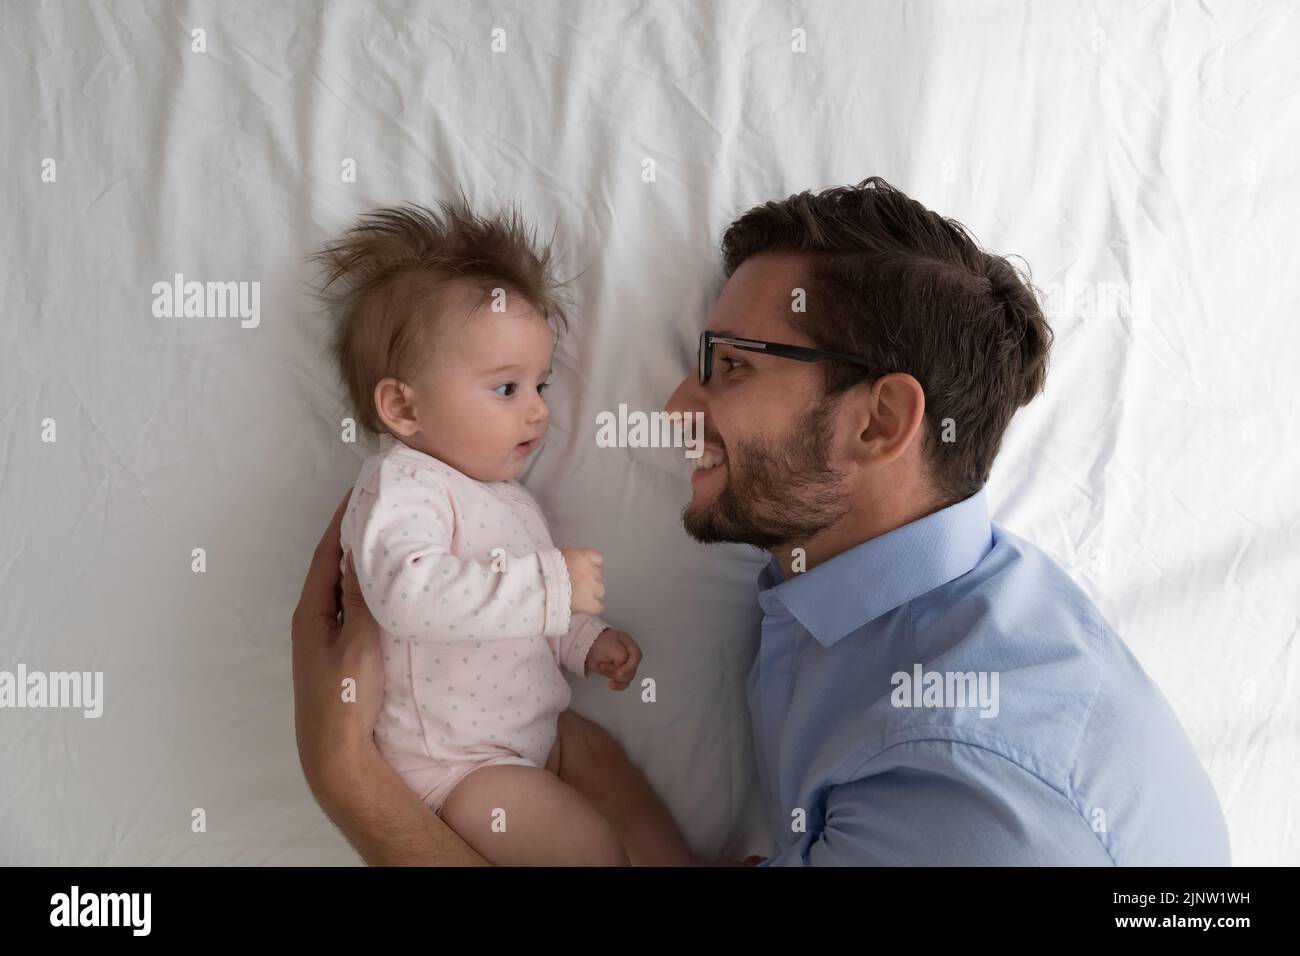 Loving father hugs baby lying together on white bedsheets Stock Photo